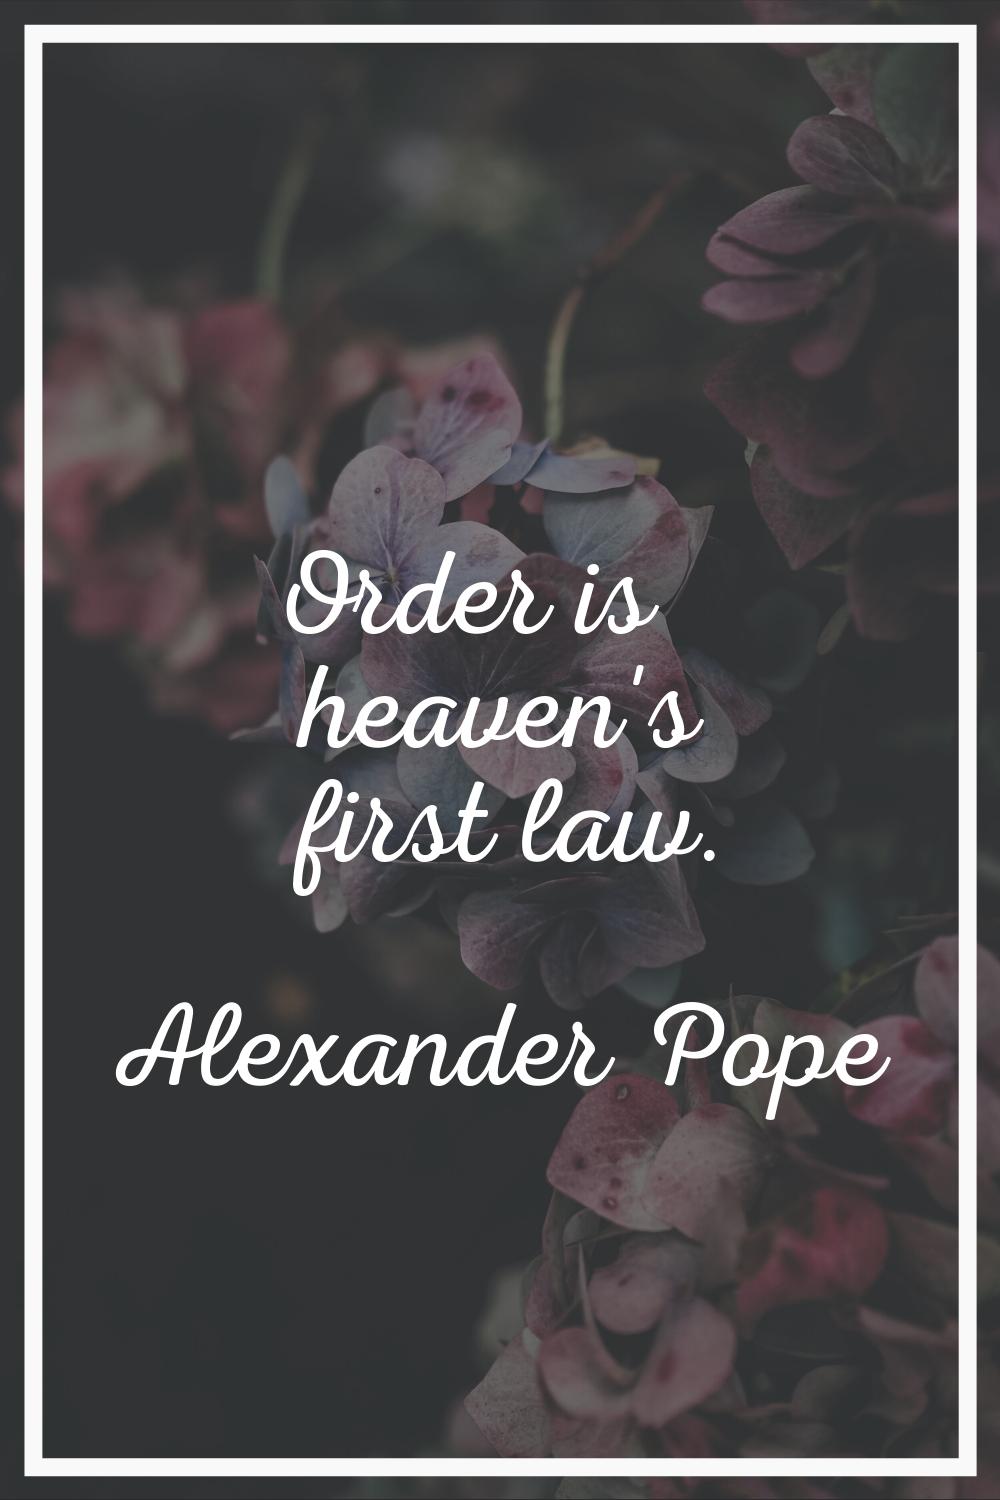 Order is heaven's first law.